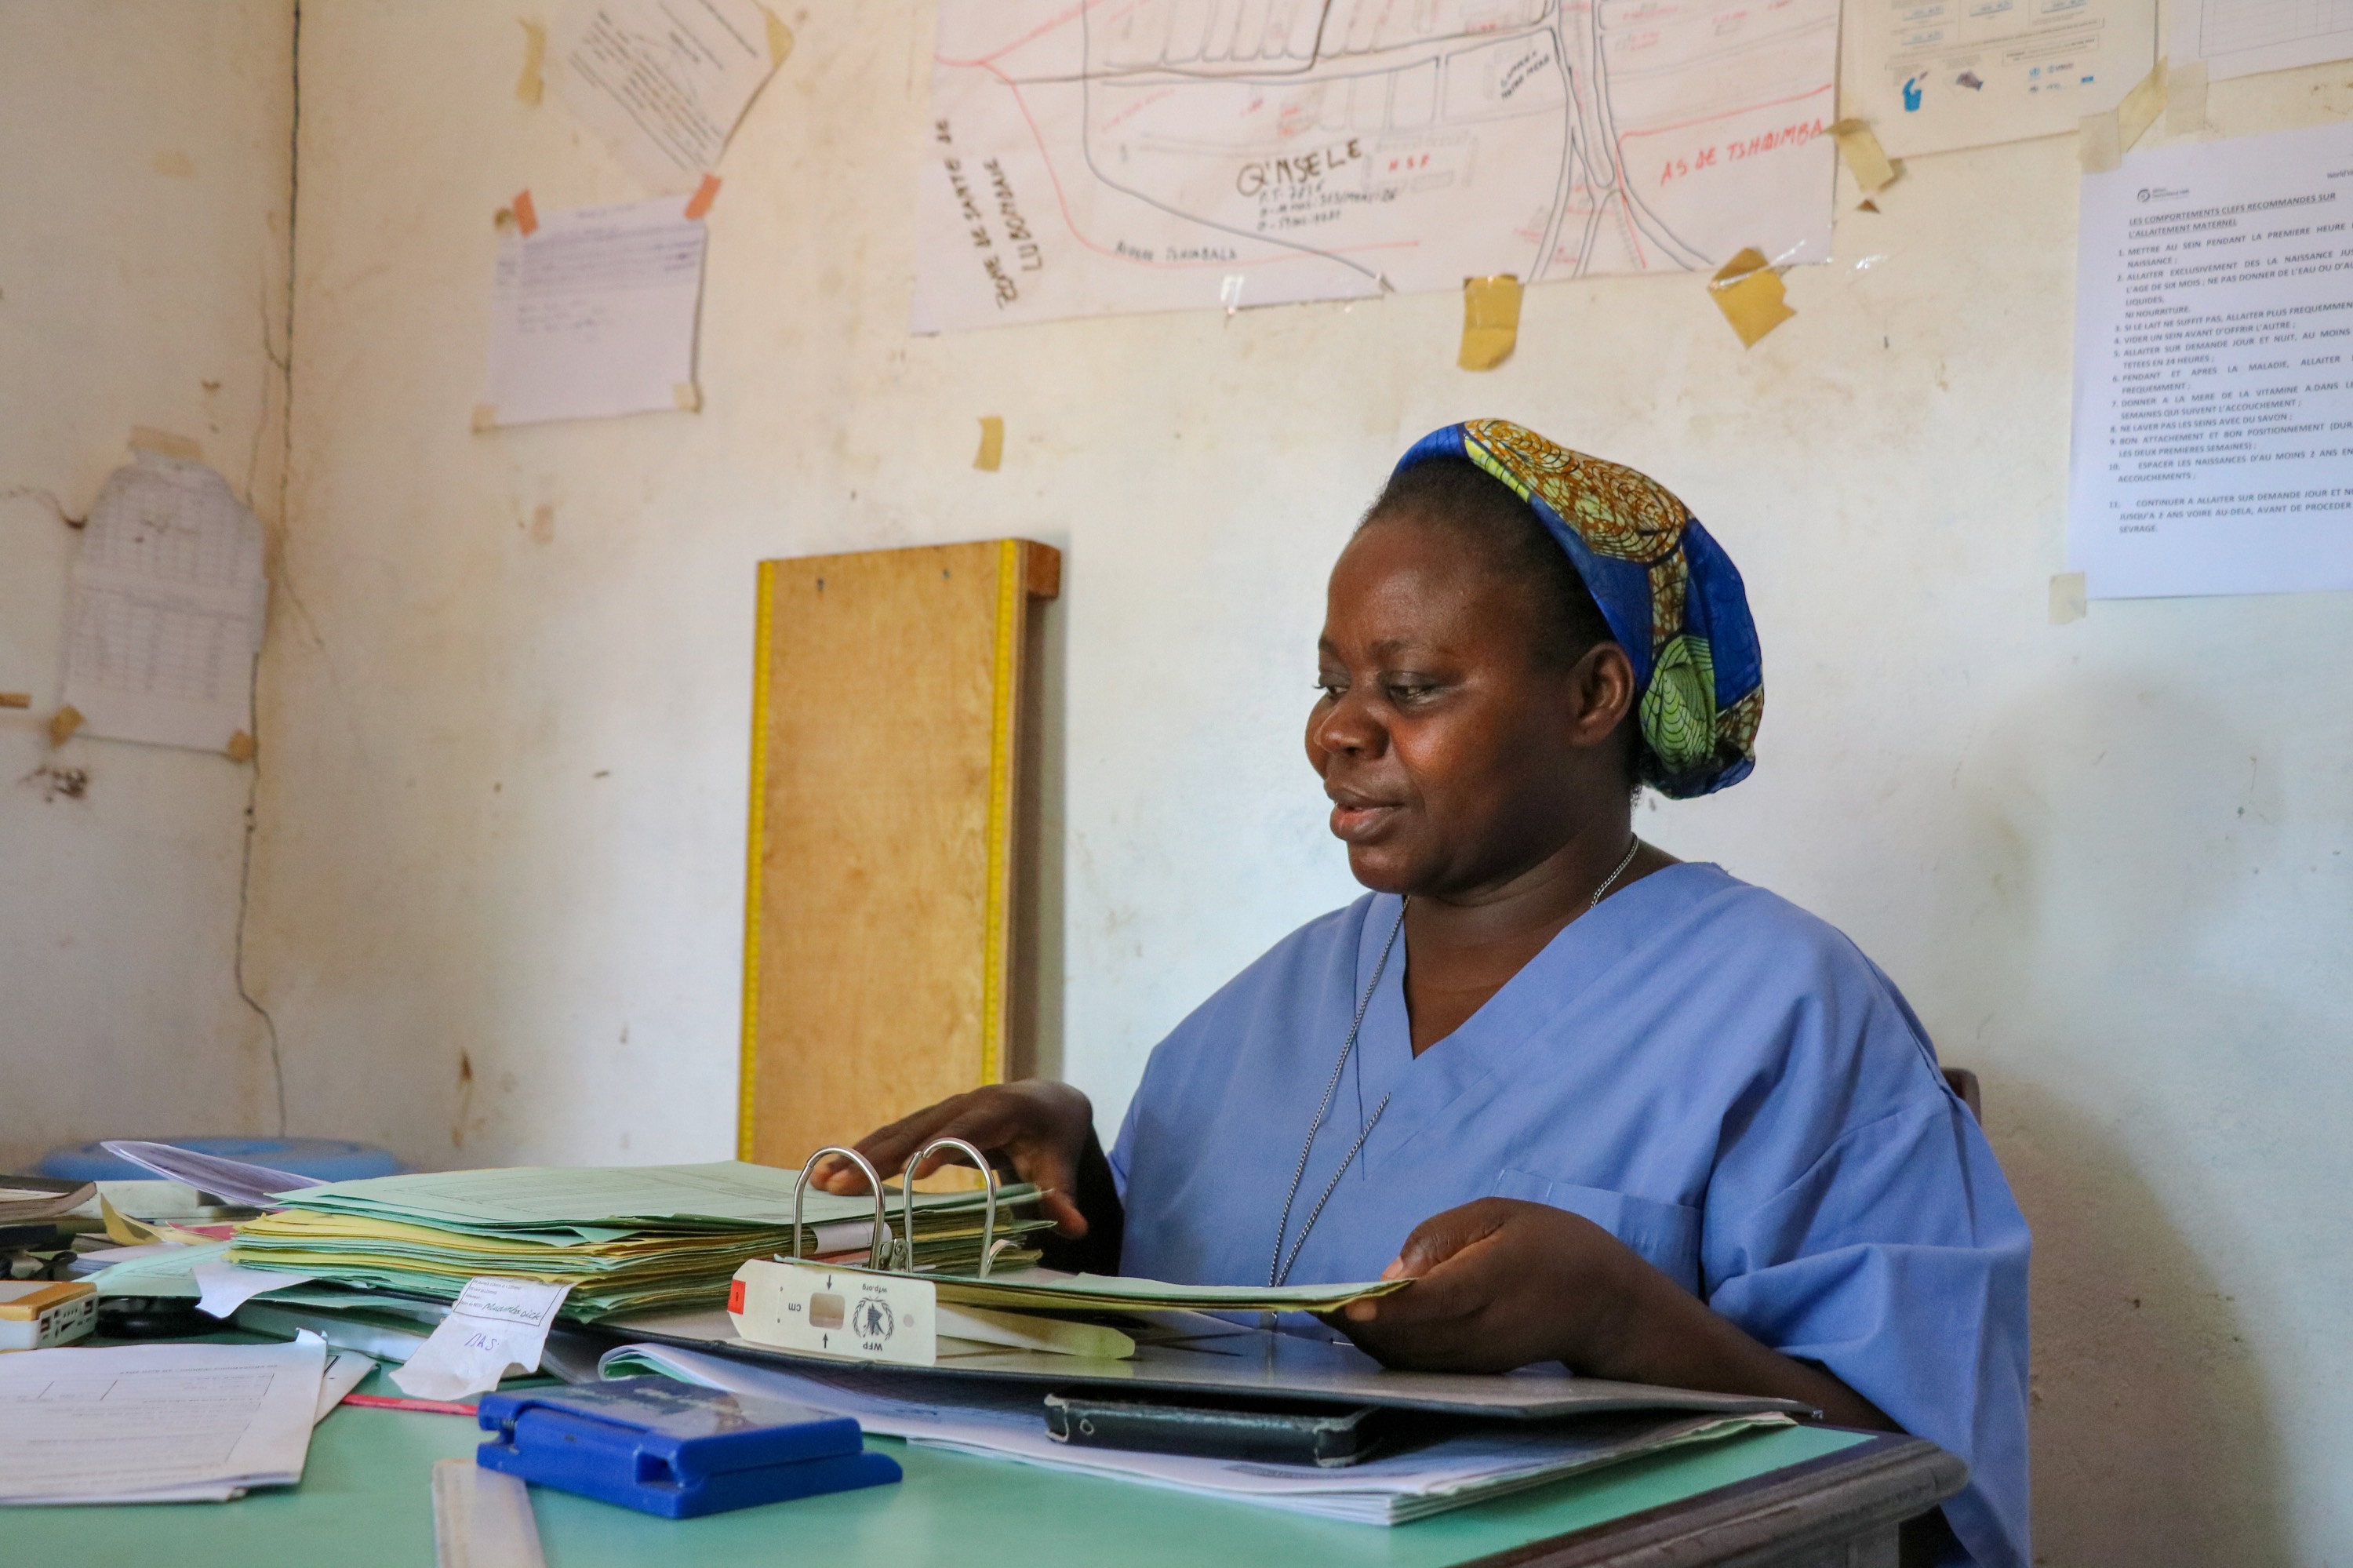 Soeur Hélène manages a health centre in Tshimbulu supported by World Vision to treat malnutrition